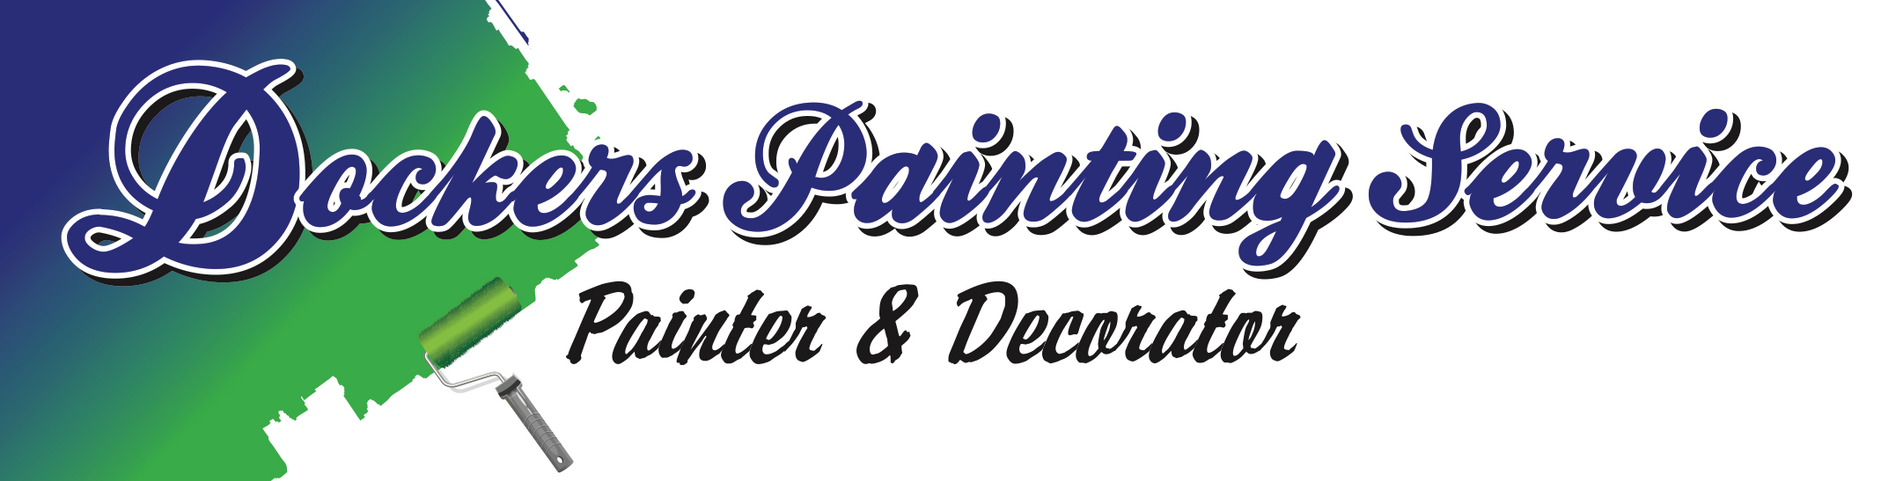 Dockers Painting Service featured image